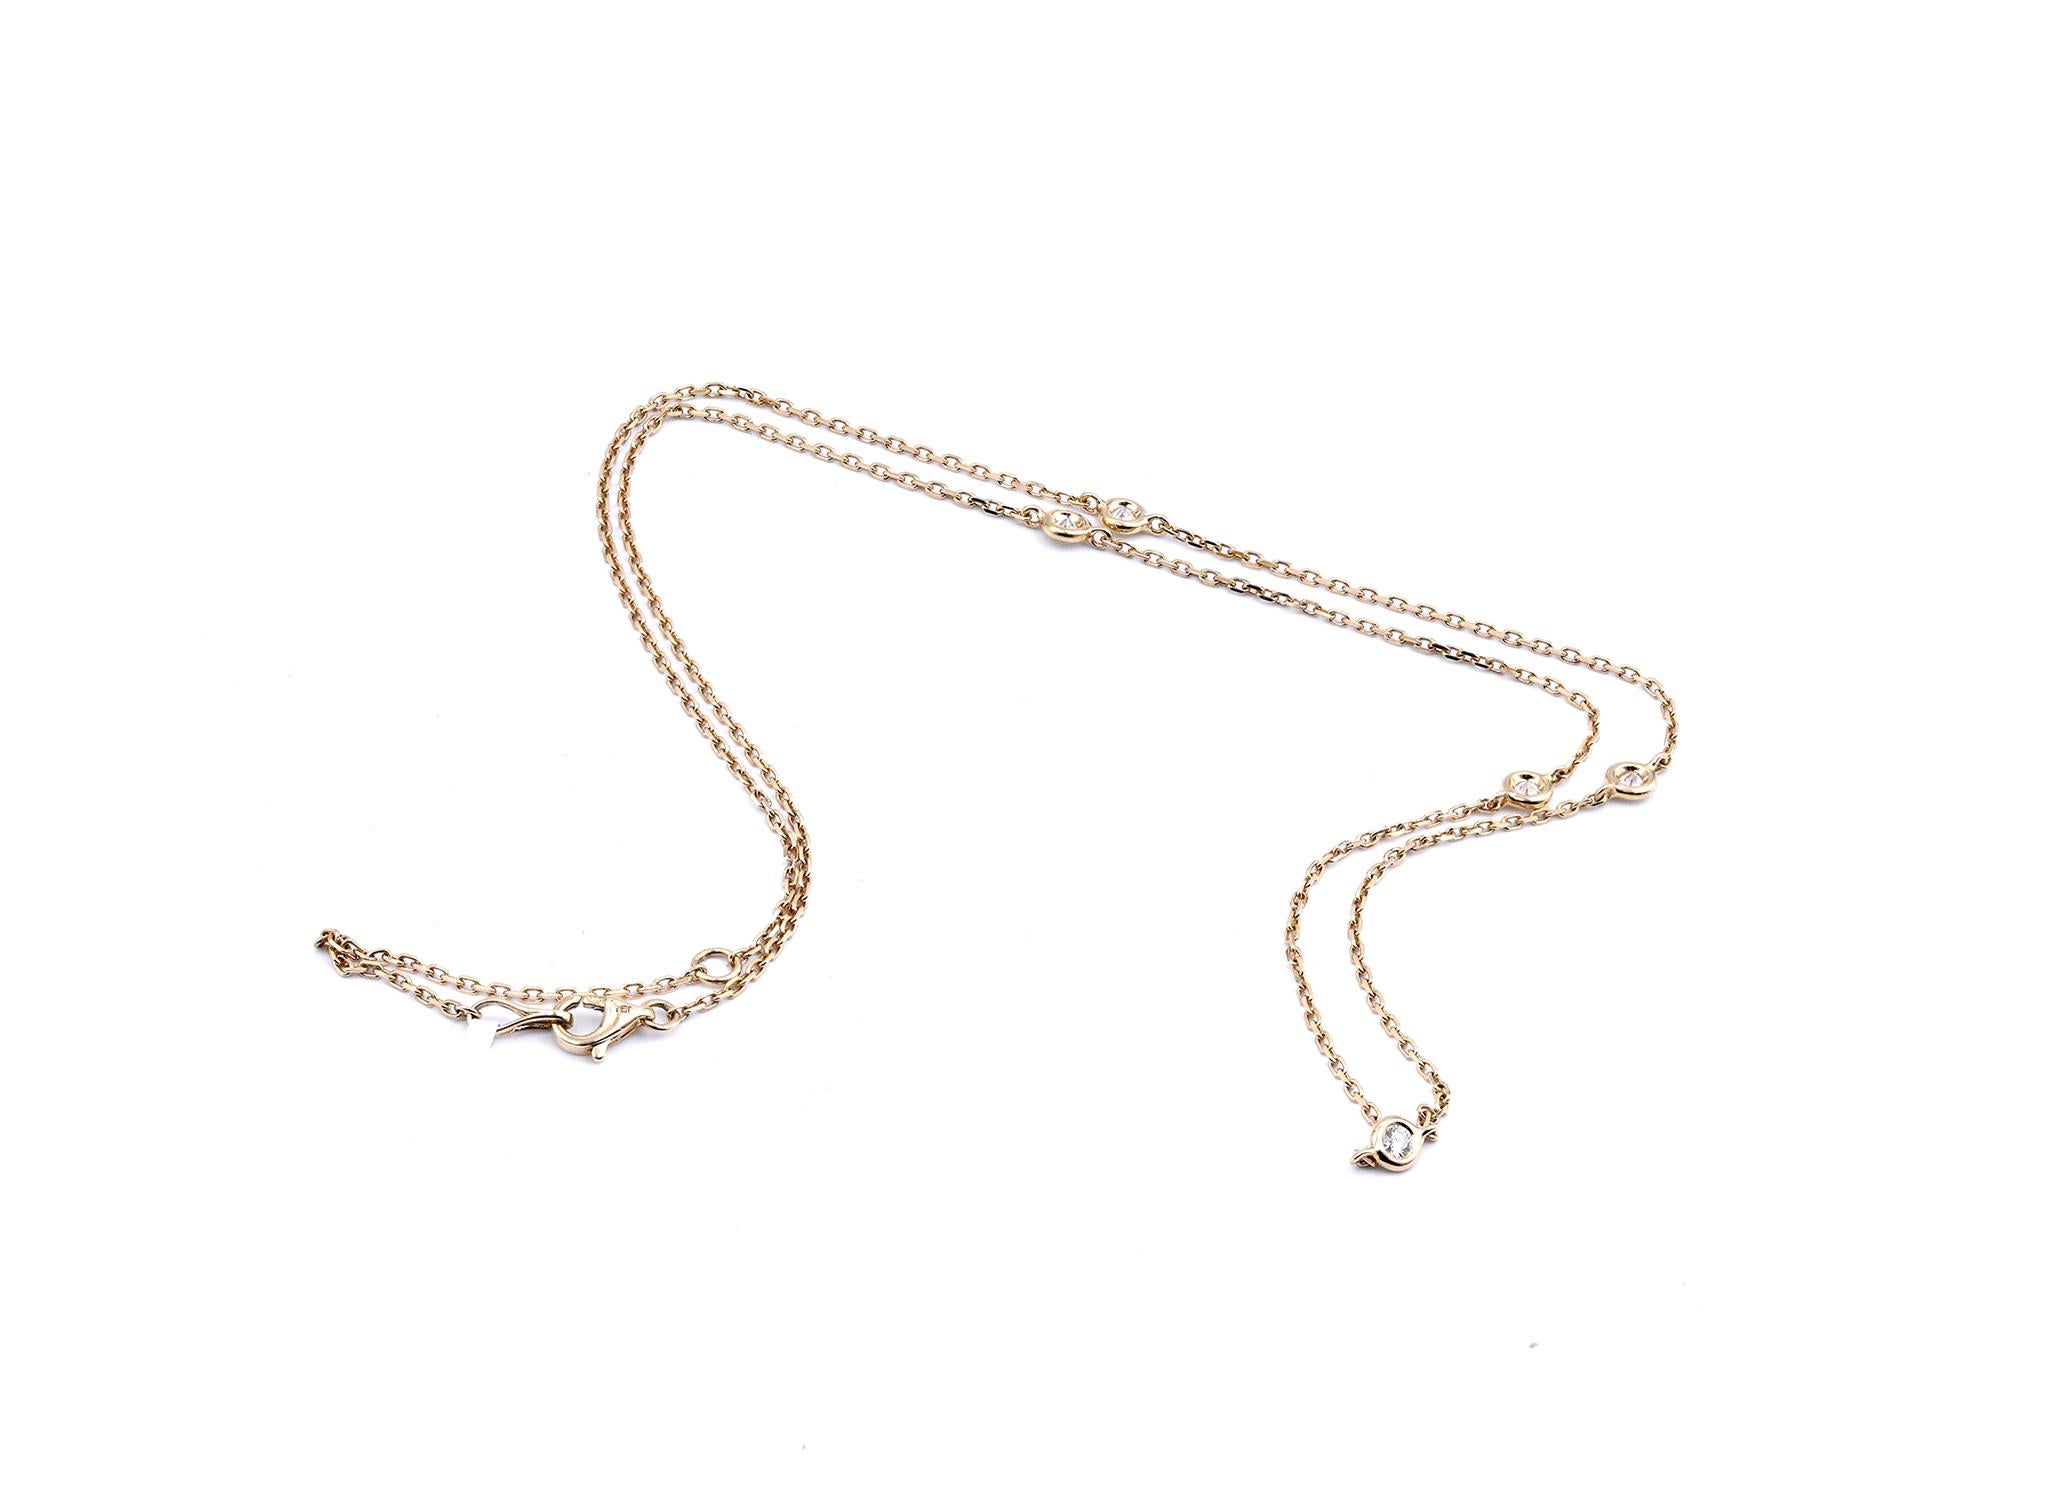 Designer: custom
Material: 14K yellow gold
Diamonds: 5 round cut = .32cttw
Color: G
Clarity: VS
Dimensions: necklace measures 18-20-inches in length 
Weight: 3.39 grams